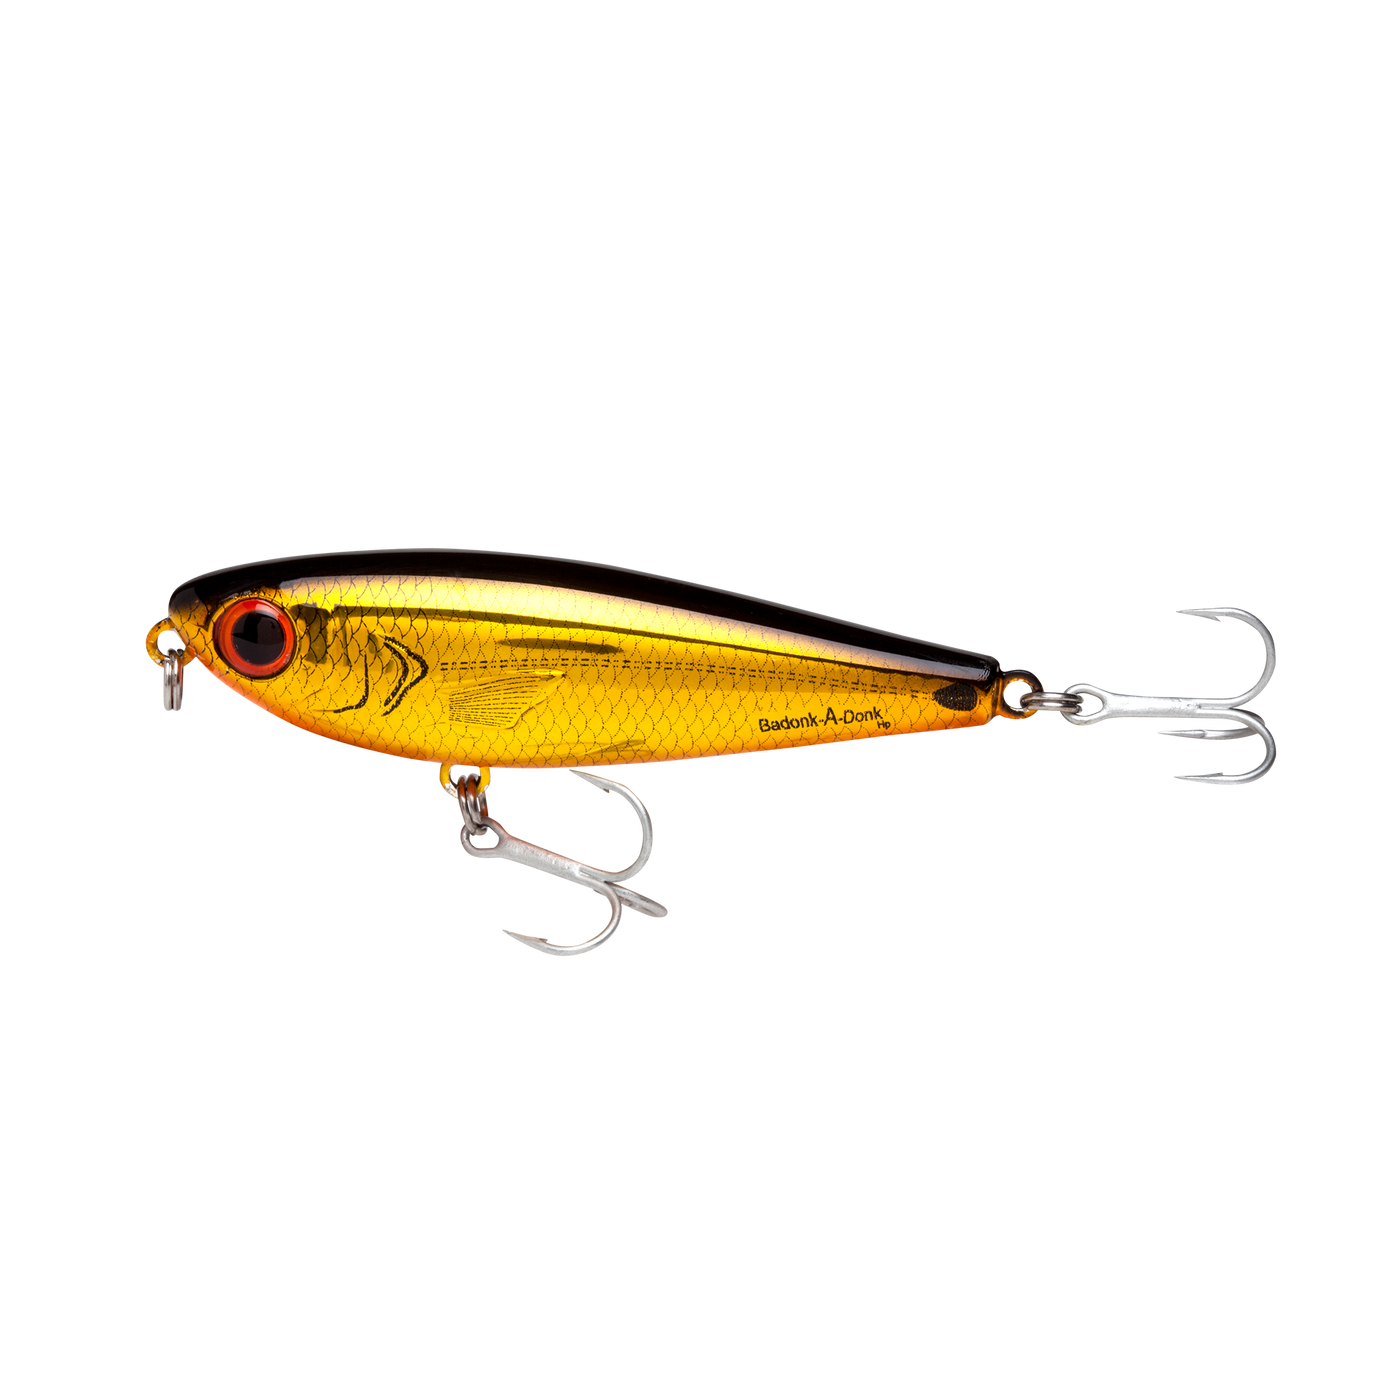 2 Pack Stick Bait Pencil Lures - Bomber Badonk-A-Donk SS 21g